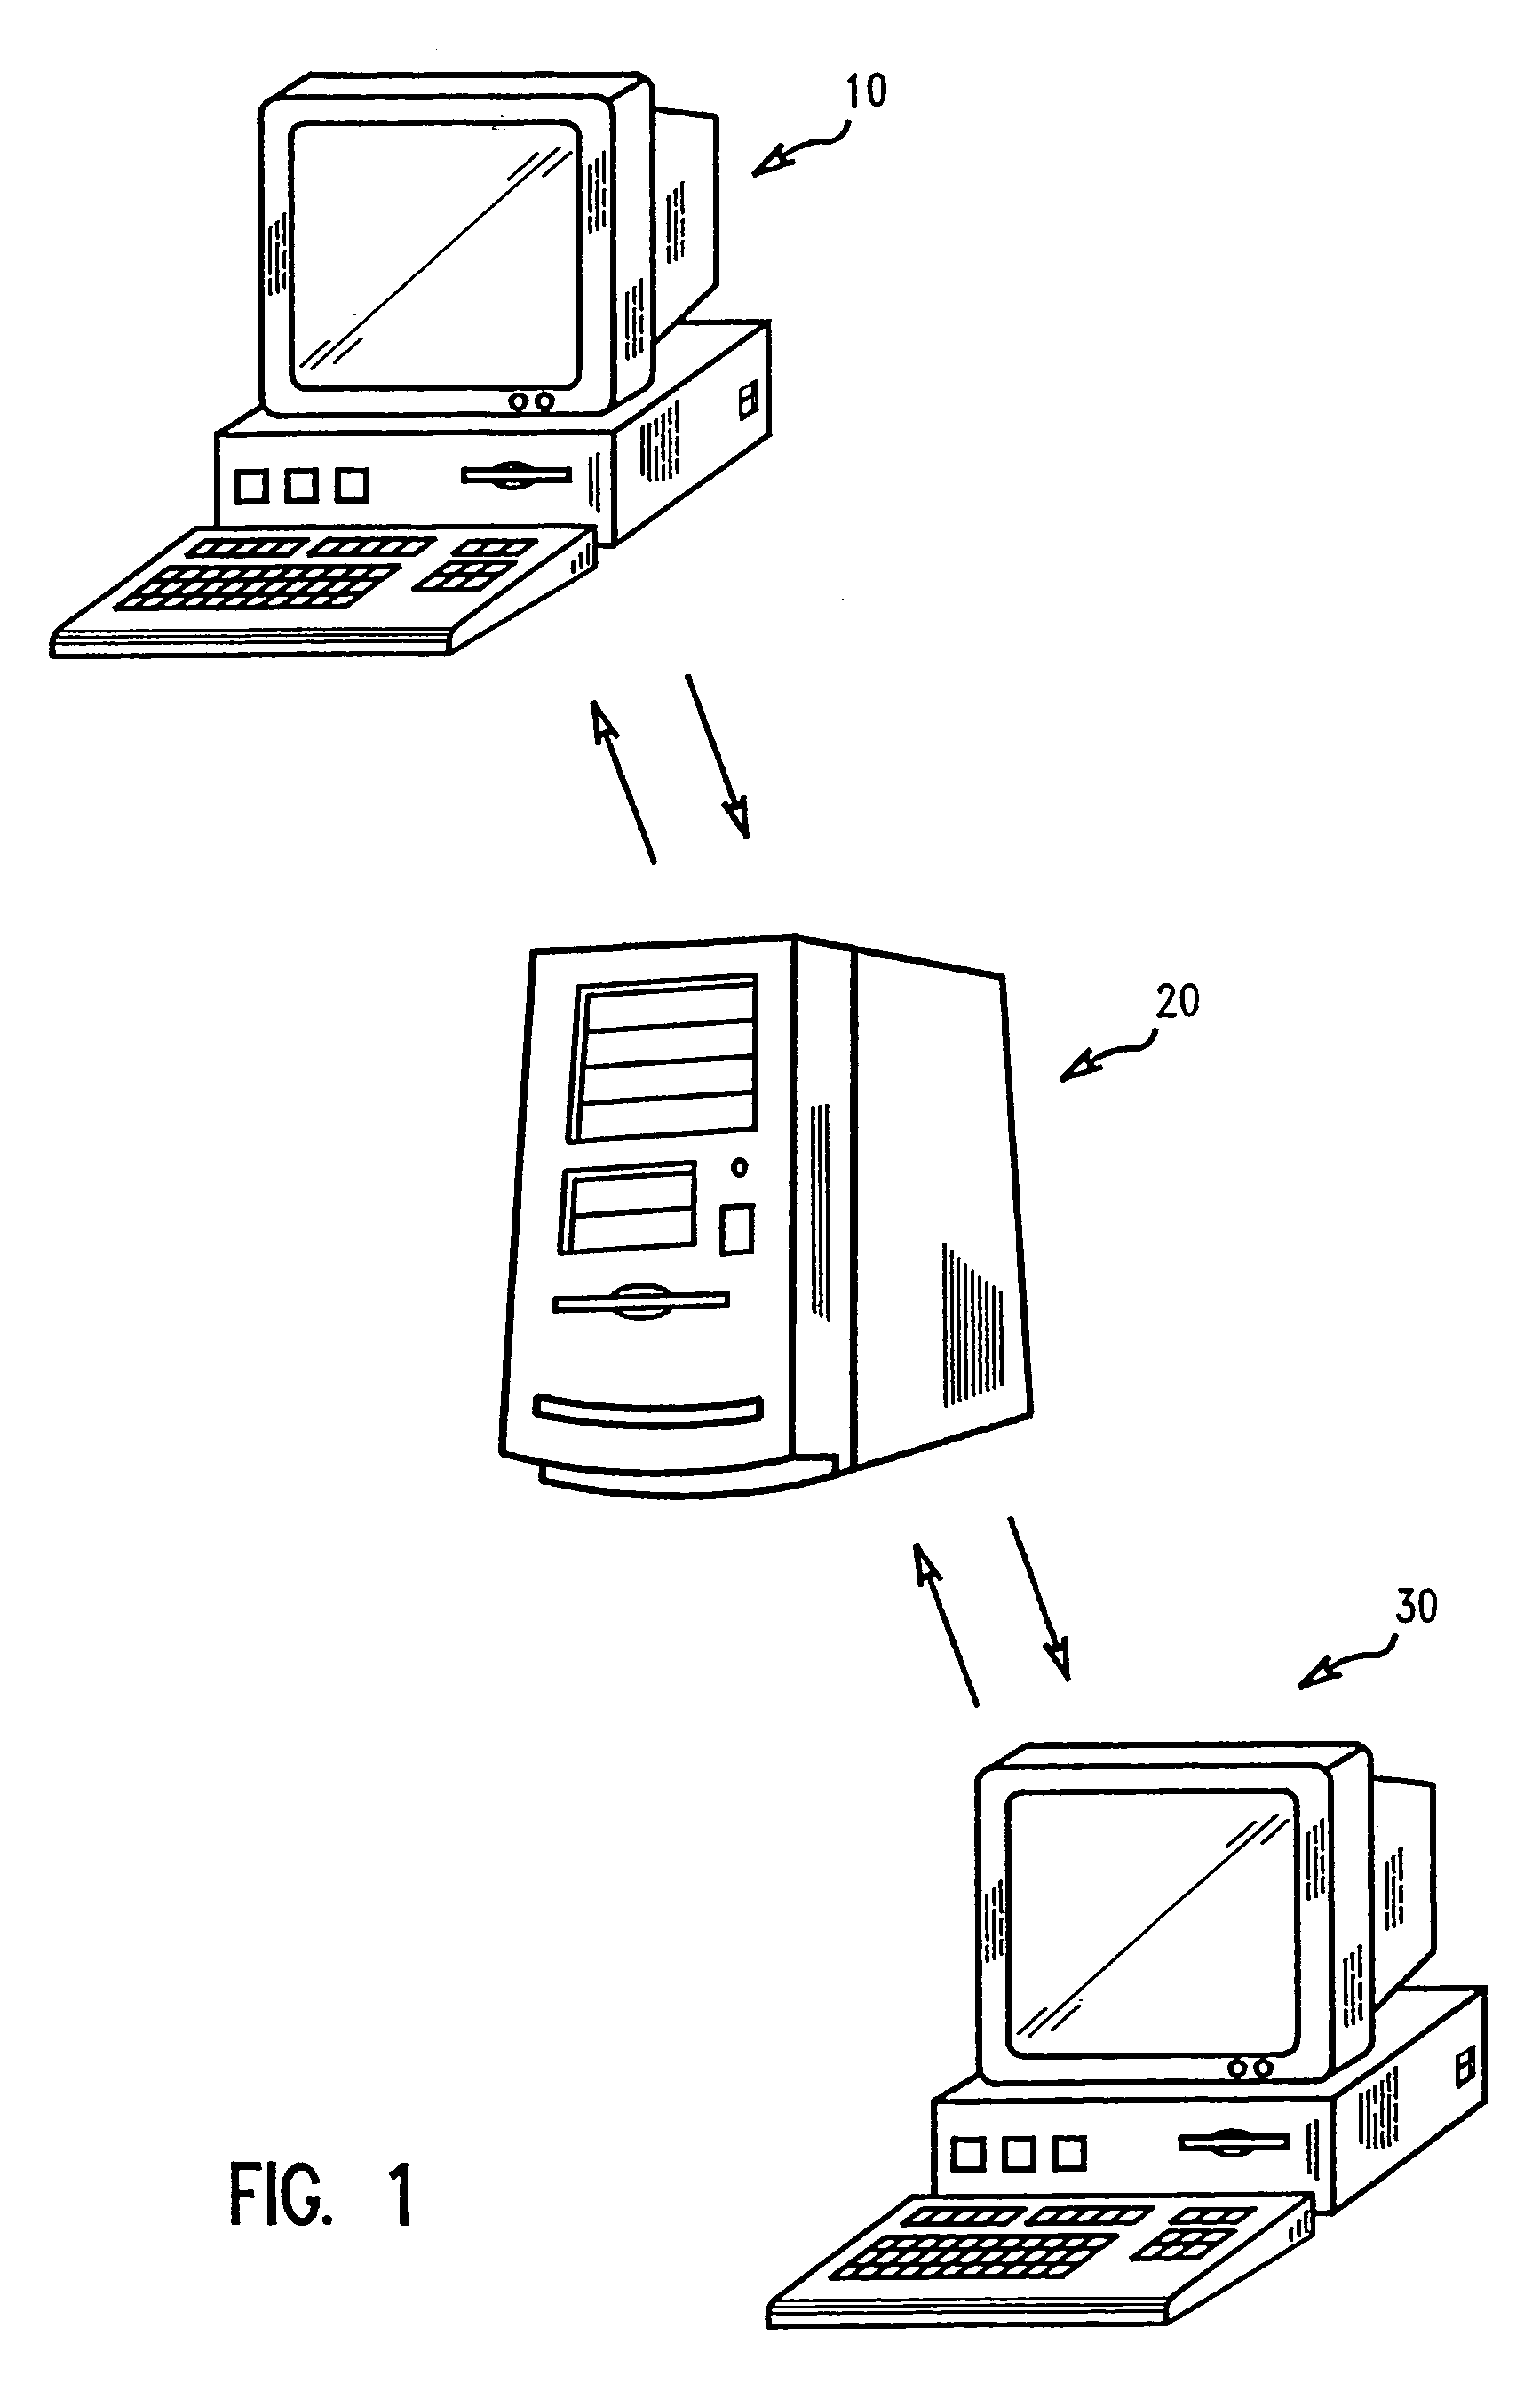 Electronic mail system